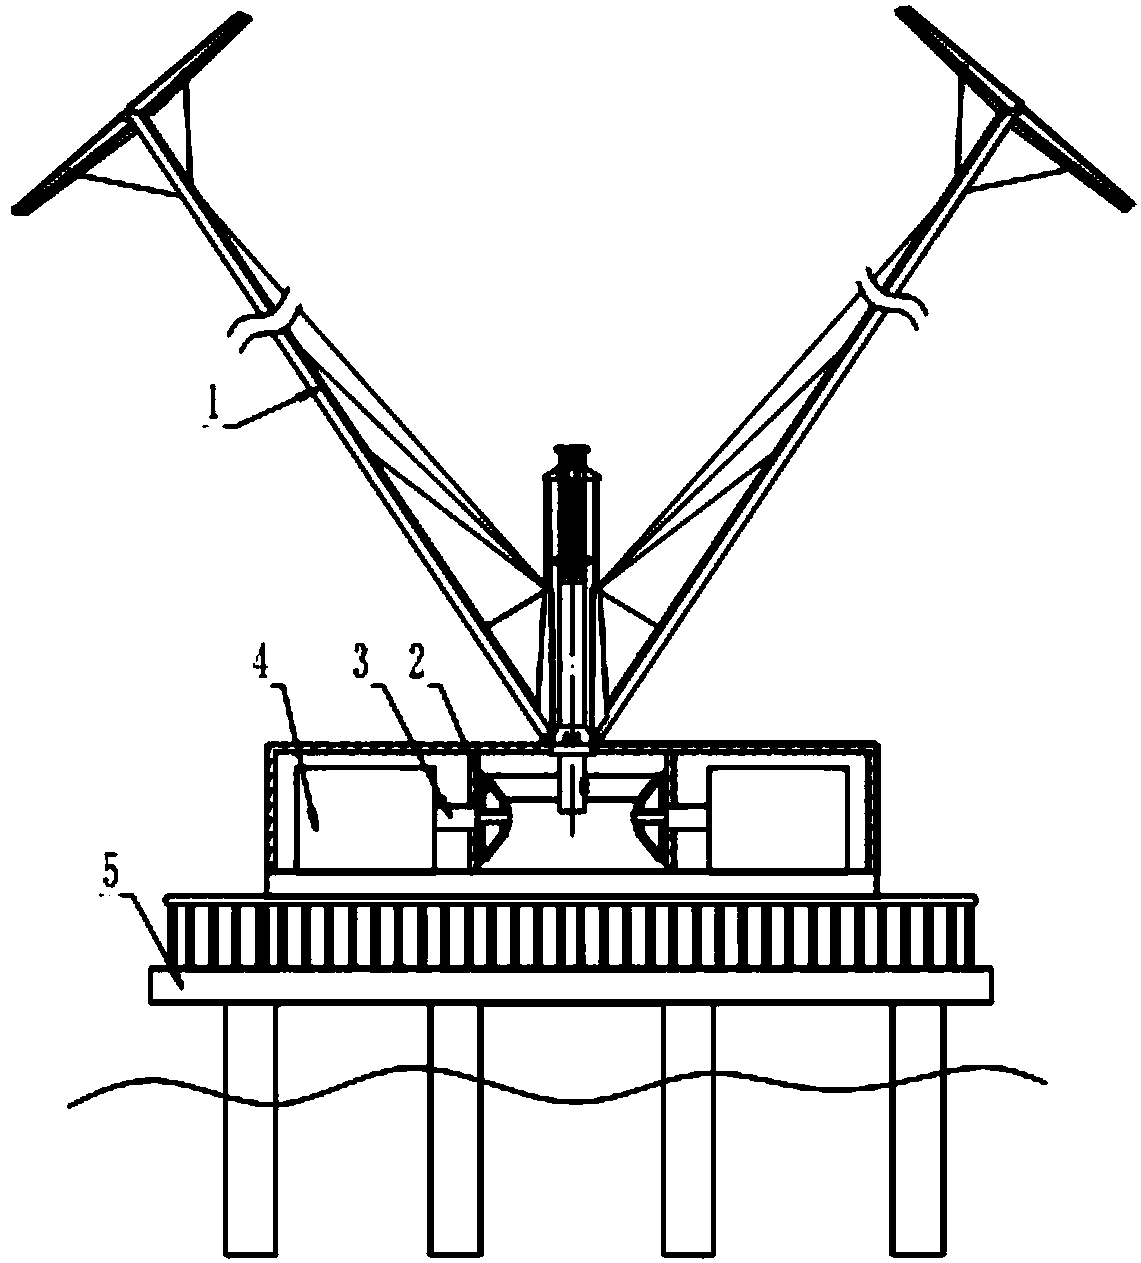 Offshore wind power generator with V-shaped wind rotor structure